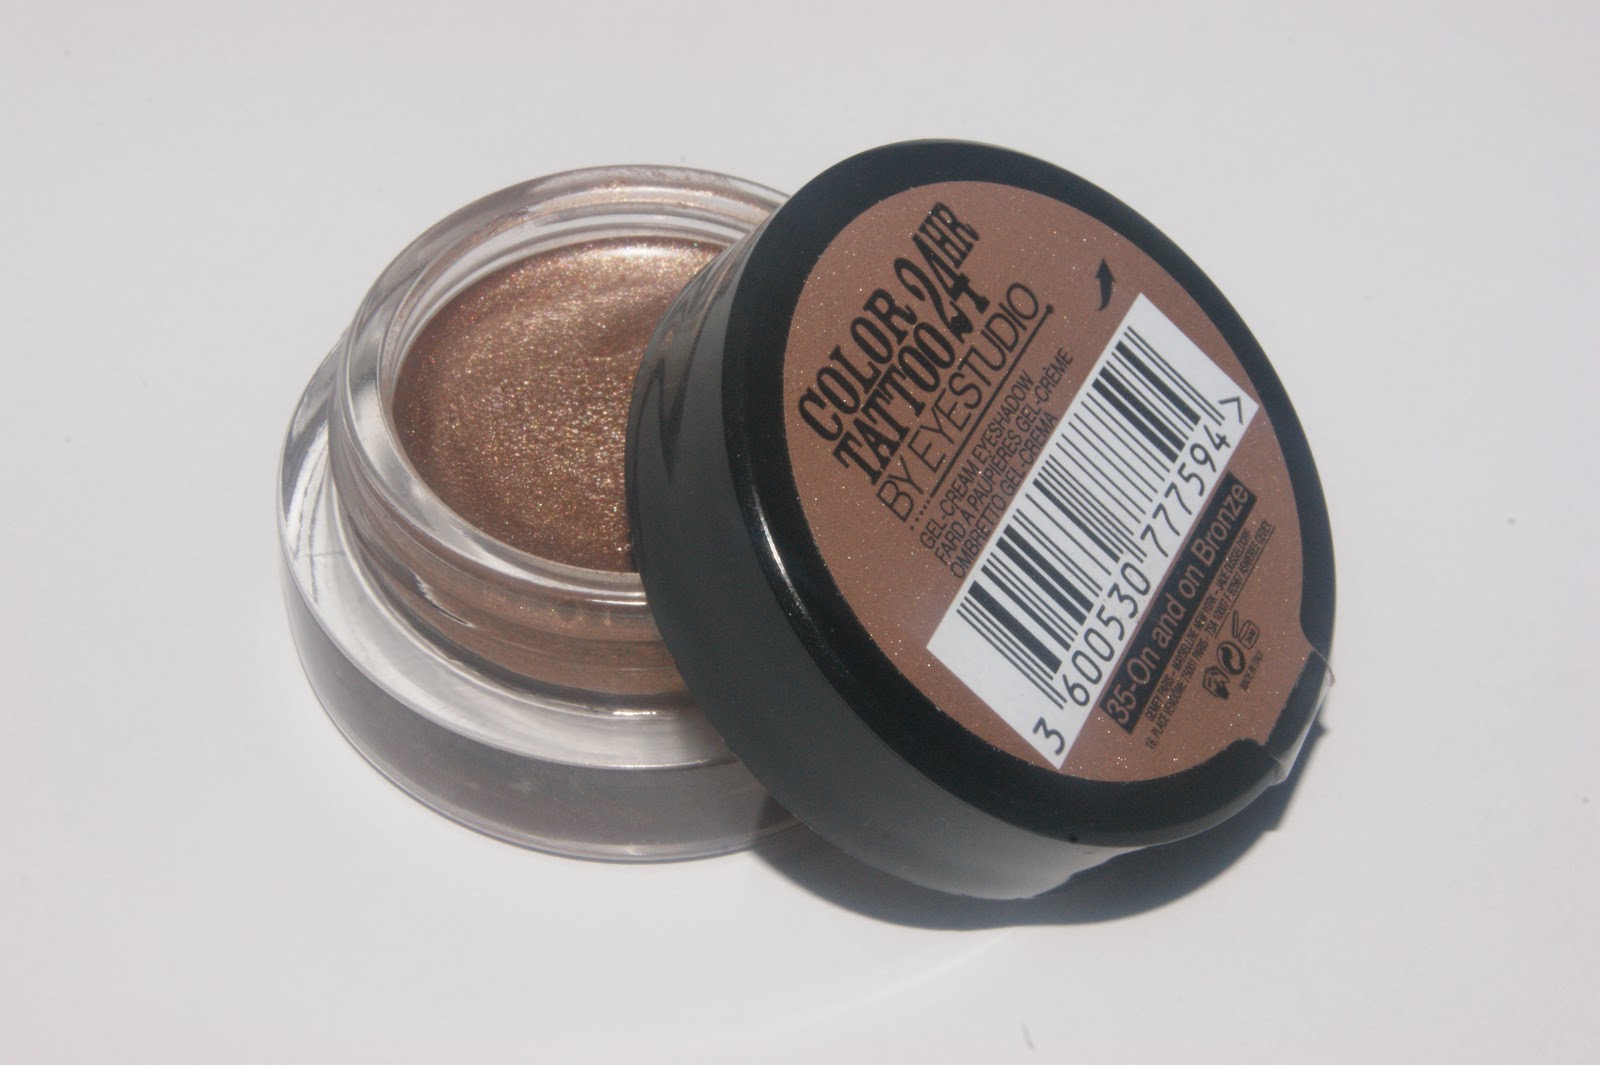 ressource mikroskop Smidighed Maybelline Color Tattoo 24hr Eyeshadow in On and On Bronze - Review | The  Sunday Girl